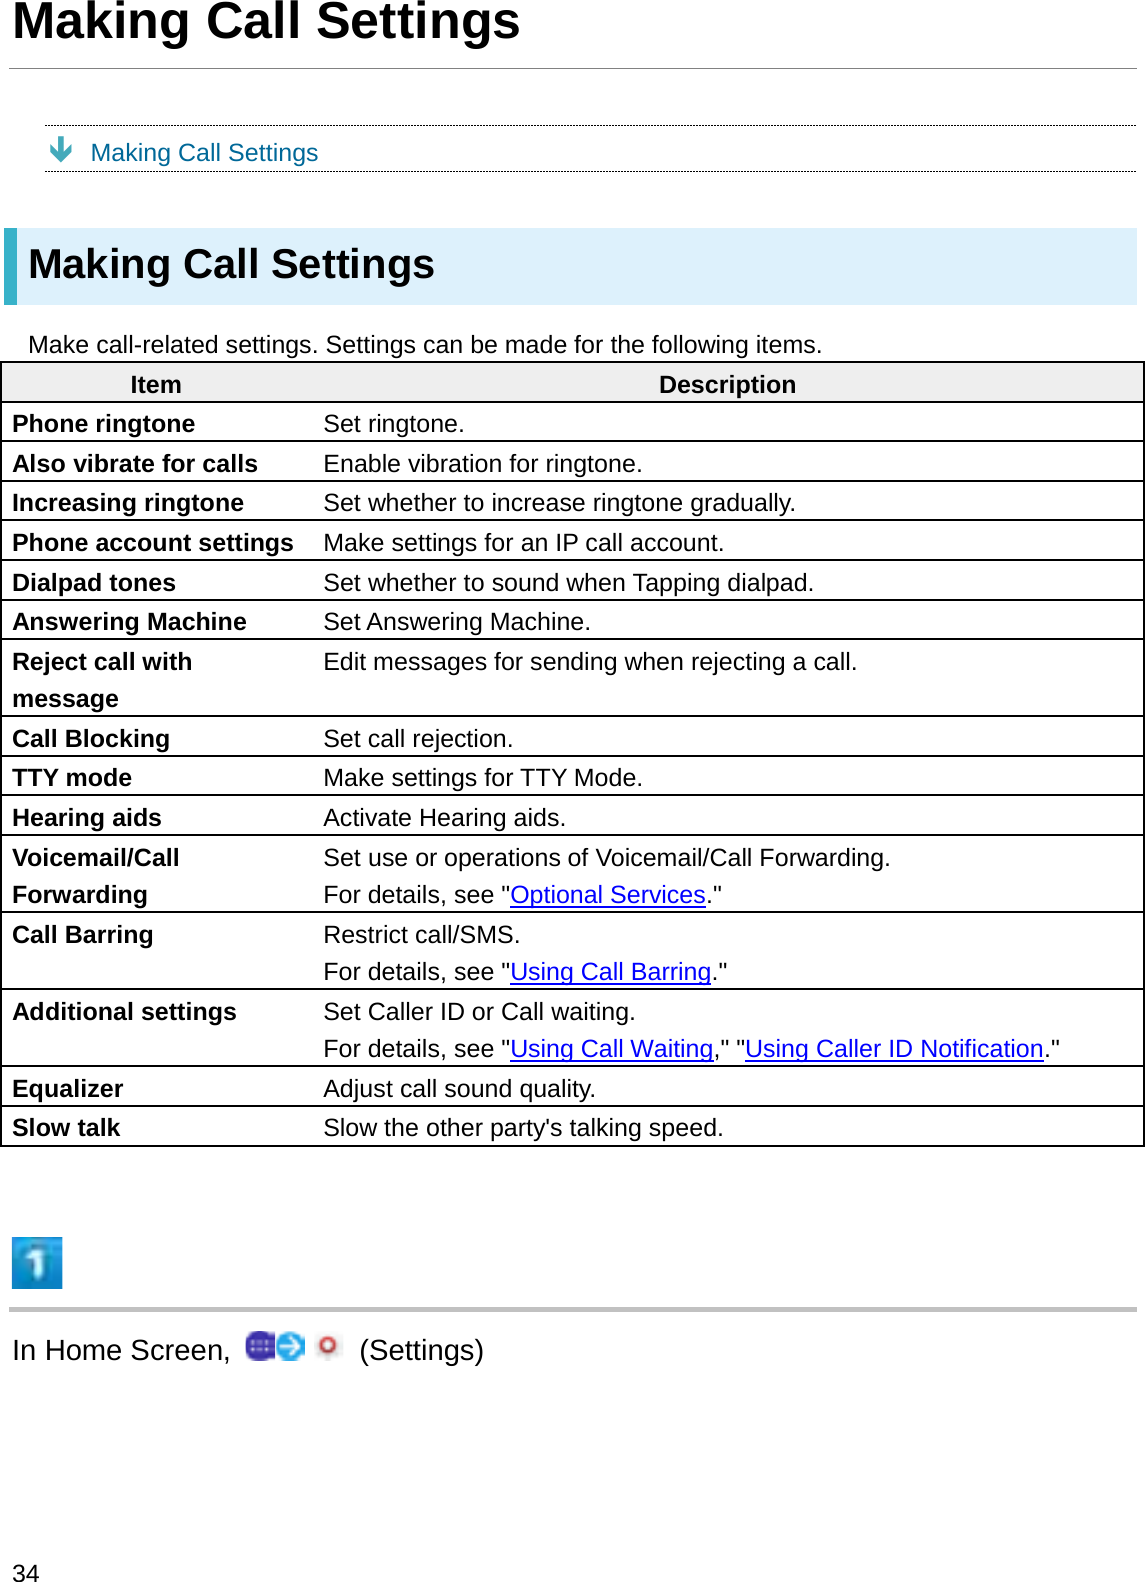 Making Call SettingsÐMaking Call SettingsMaking Call SettingsMake call-related settings. Settings can be made for the following items.Item DescriptionPhone ringtone Set ringtone.Also vibrate for calls Enable vibration for ringtone.Increasing ringtone Set whether to increase ringtone gradually.Phone account settings Make settings for an IP call account.Dialpad tones Set whether to sound when Tapping dialpad.Answering Machine Set Answering Machine.Reject call with messageEdit messages for sending when rejecting a call.Call Blocking Set call rejection.TTY mode Make settings for TTY Mode.Hearing aids Activate Hearing aids.Voicemail/Call ForwardingSet use or operations of Voicemail/Call Forwarding. For details, see &quot;Optional Services.&quot;Call Barring Restrict call/SMS. For details, see &quot;Using Call Barring.&quot;Additional settings Set Caller ID or Call waiting. For details, see &quot;Using Call Waiting,&quot; &quot;Using Caller ID Notification.&quot;Equalizer Adjust call sound quality.Slow talk Slow the other party&apos;s talking speed.In Home Screen,  (Settings)34